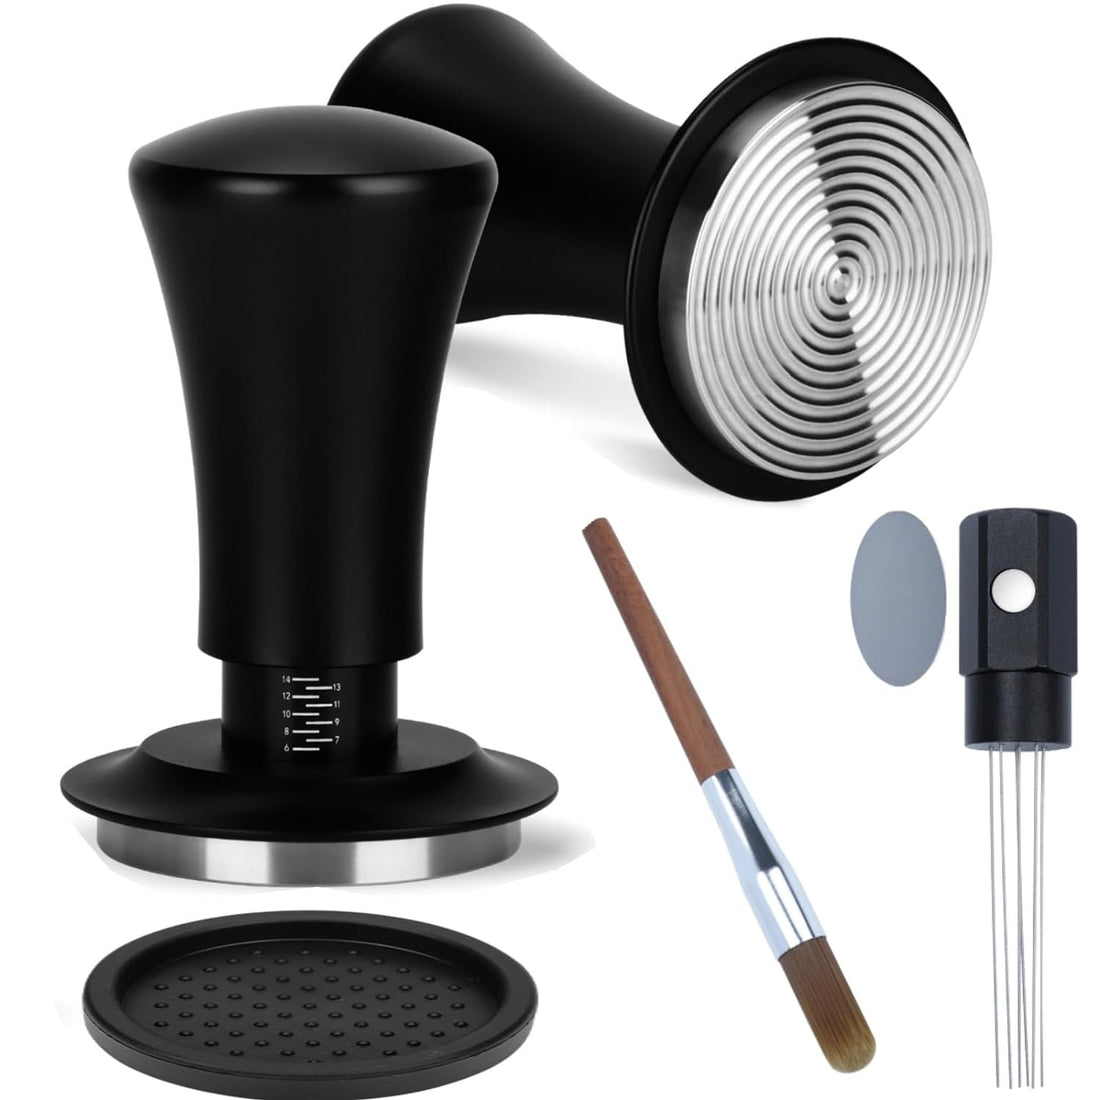 BCIBhucy Espresso Tamper 58.35mm Stainless Steel Tamper Constant Pressure Espresso Tamper Coffee Tamper With Calibrated Spring Loaded Gifts for Barista Coffee Lovers (58.35mm)